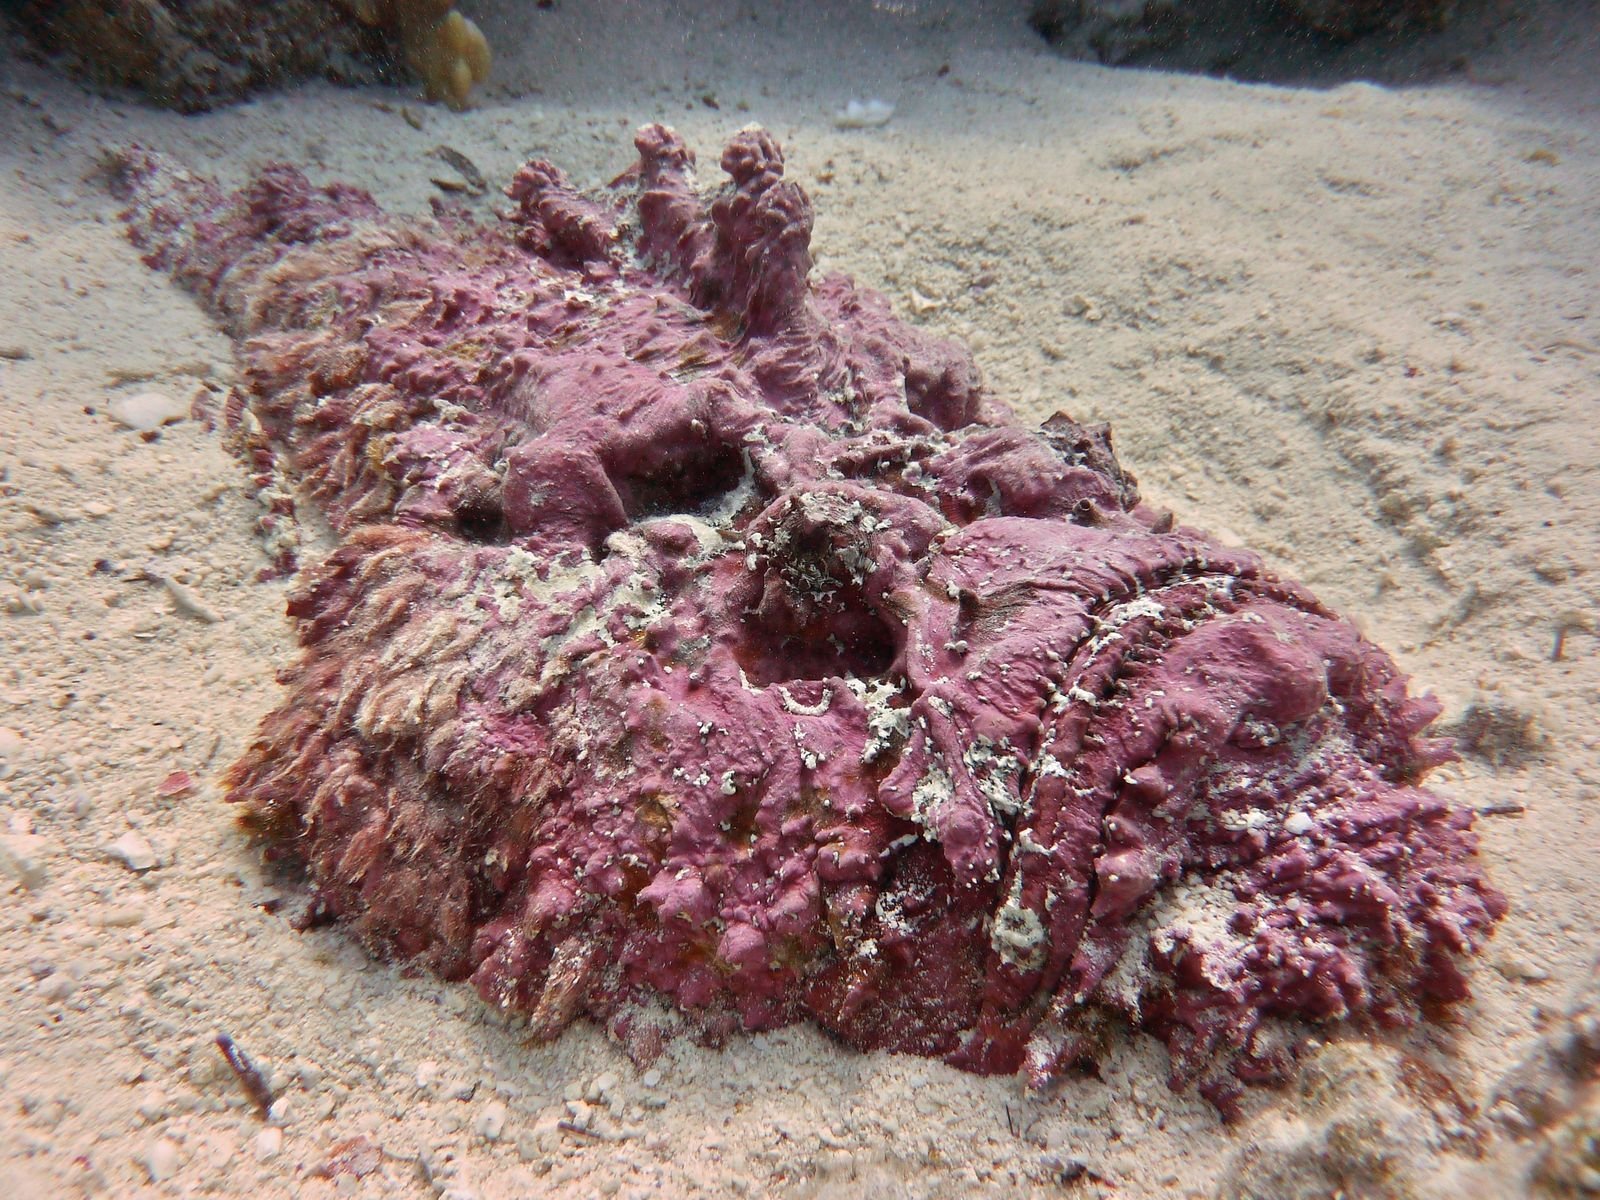 Stonefish can be found laying on the beach as well